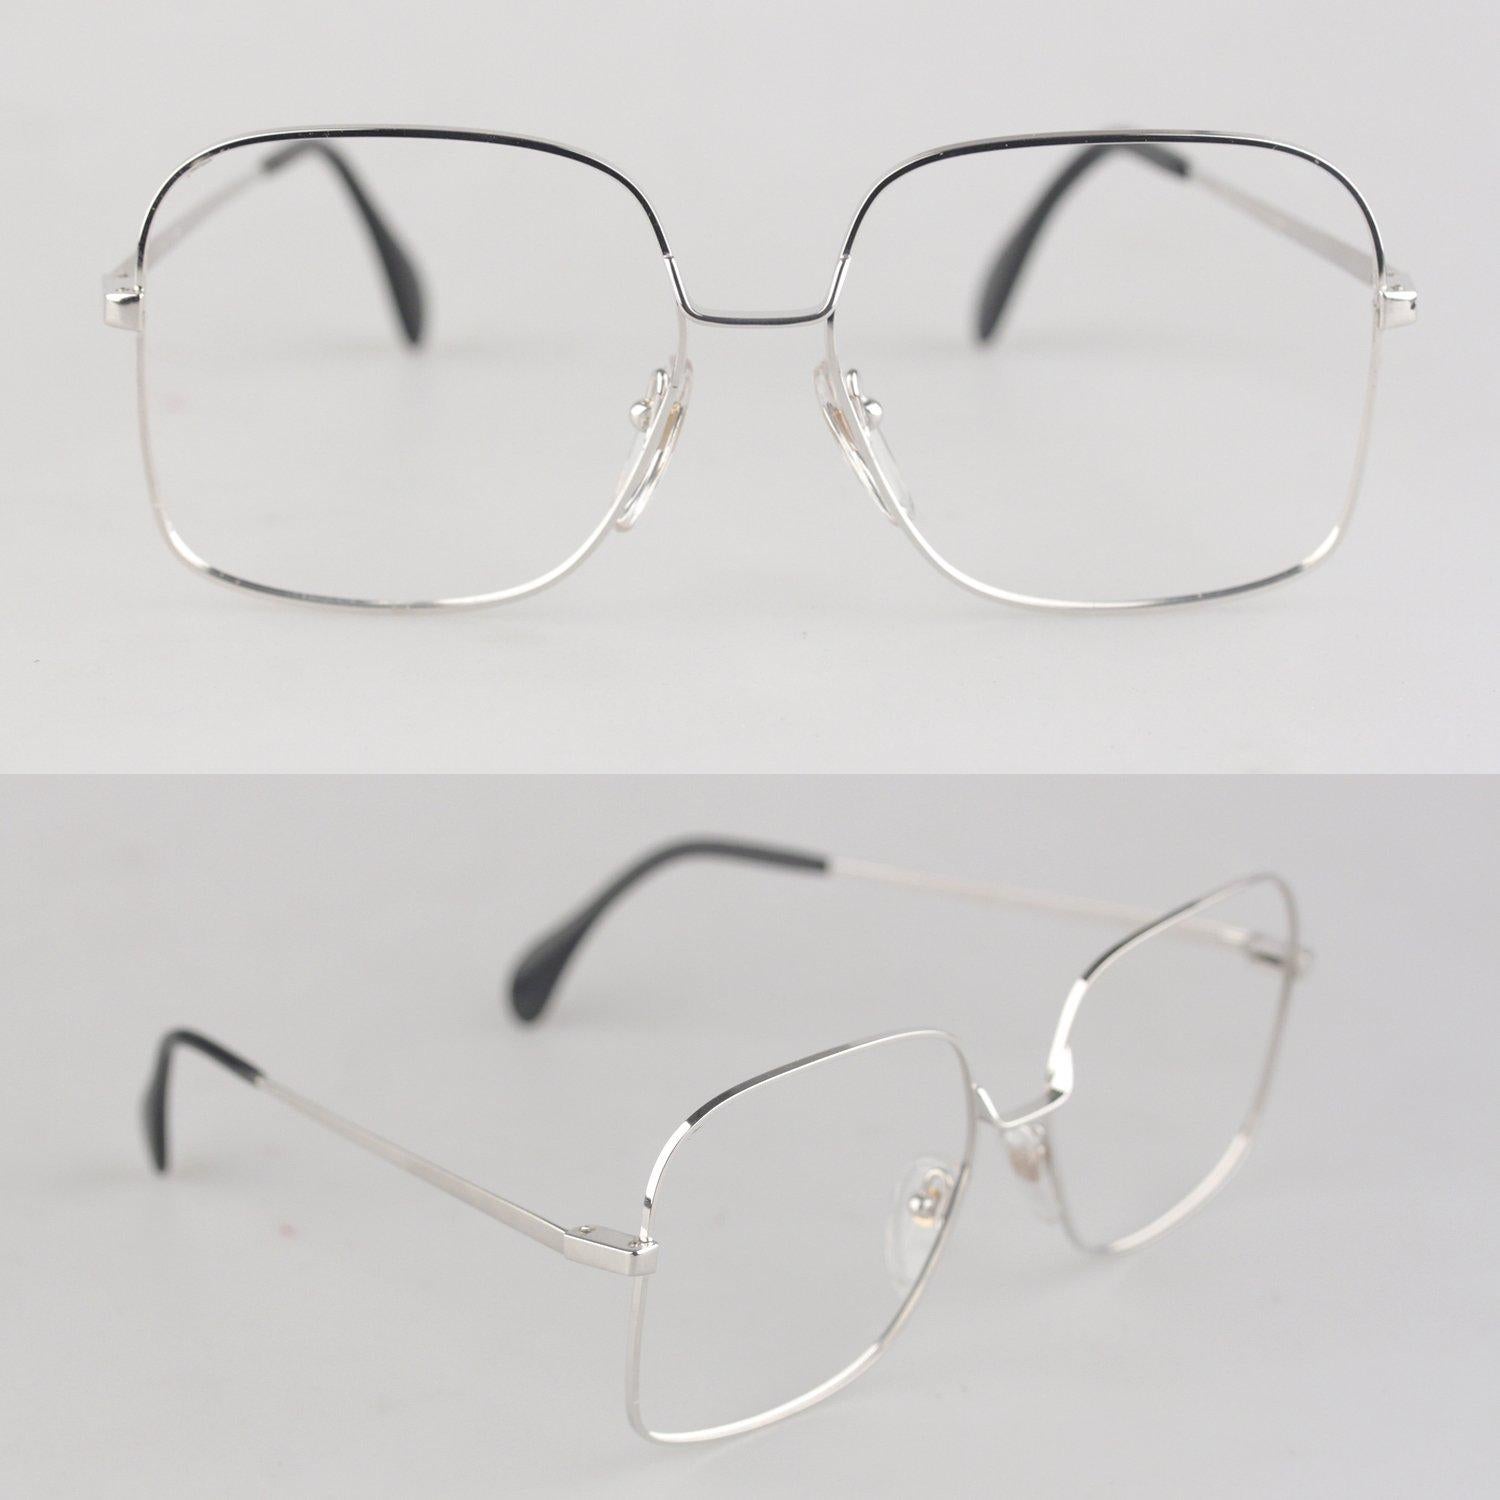 Gray Vogue D'Or by Bausch & Lomb 1/20 10K GF White-Gold Mint Eyeglasses 520